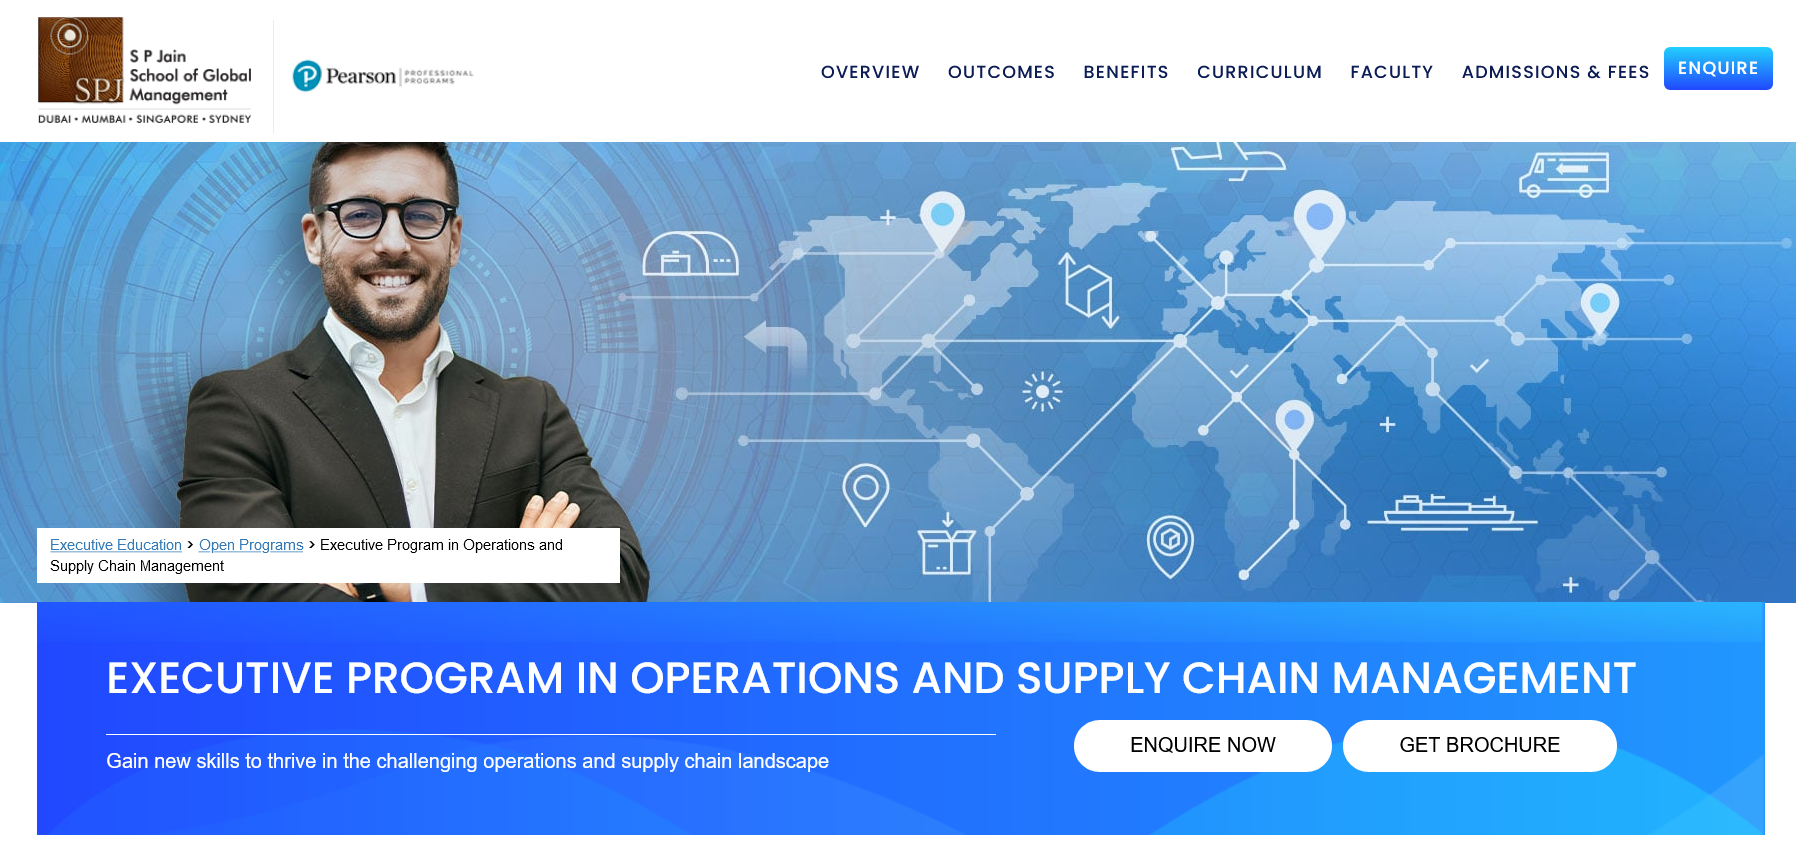 Executive Program in Operations and Supply Chain Management